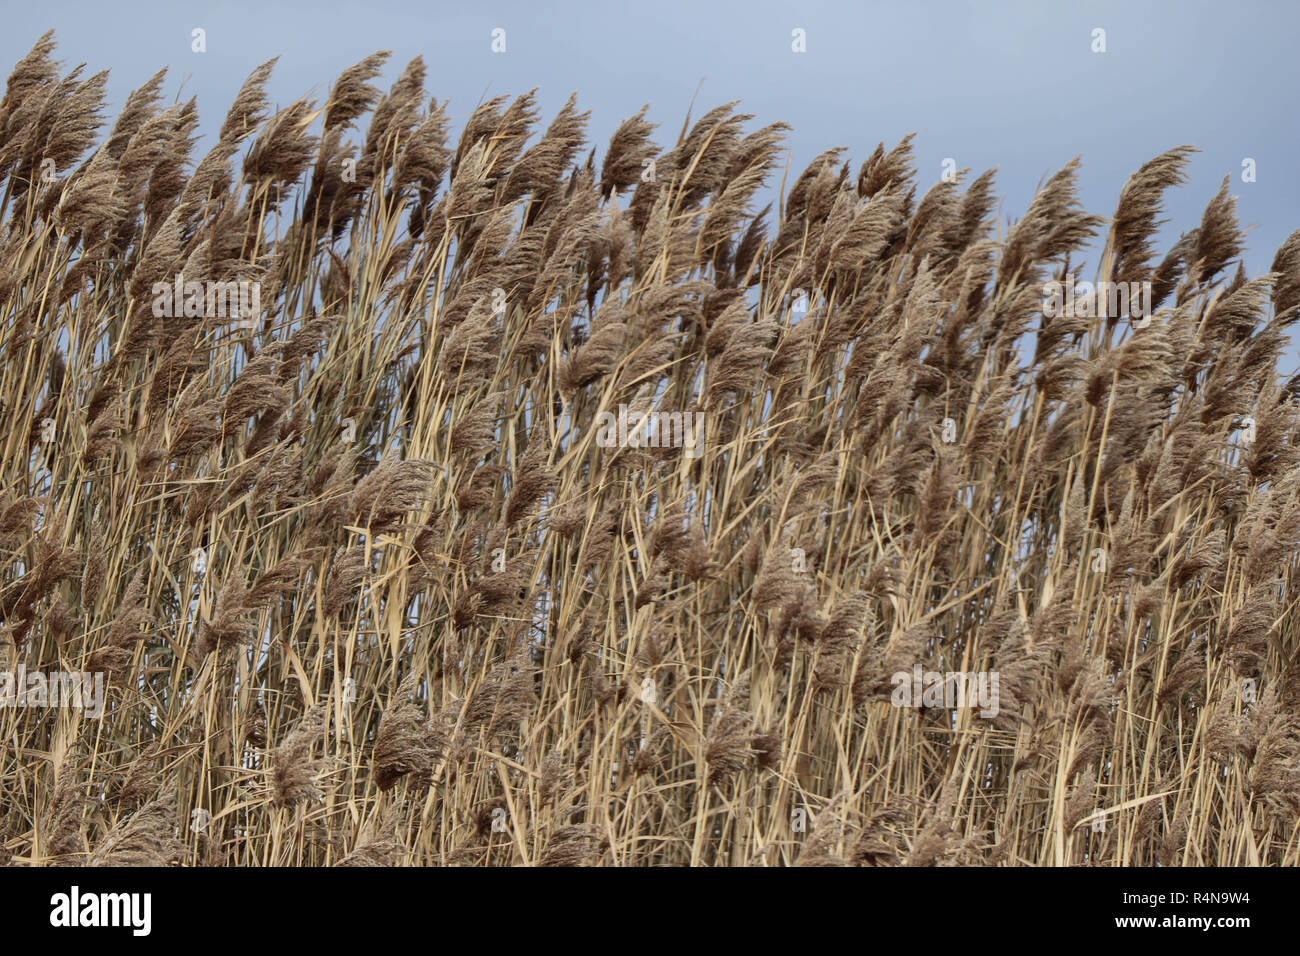 Wild grass in Illinois road side ditch. Stock Photo